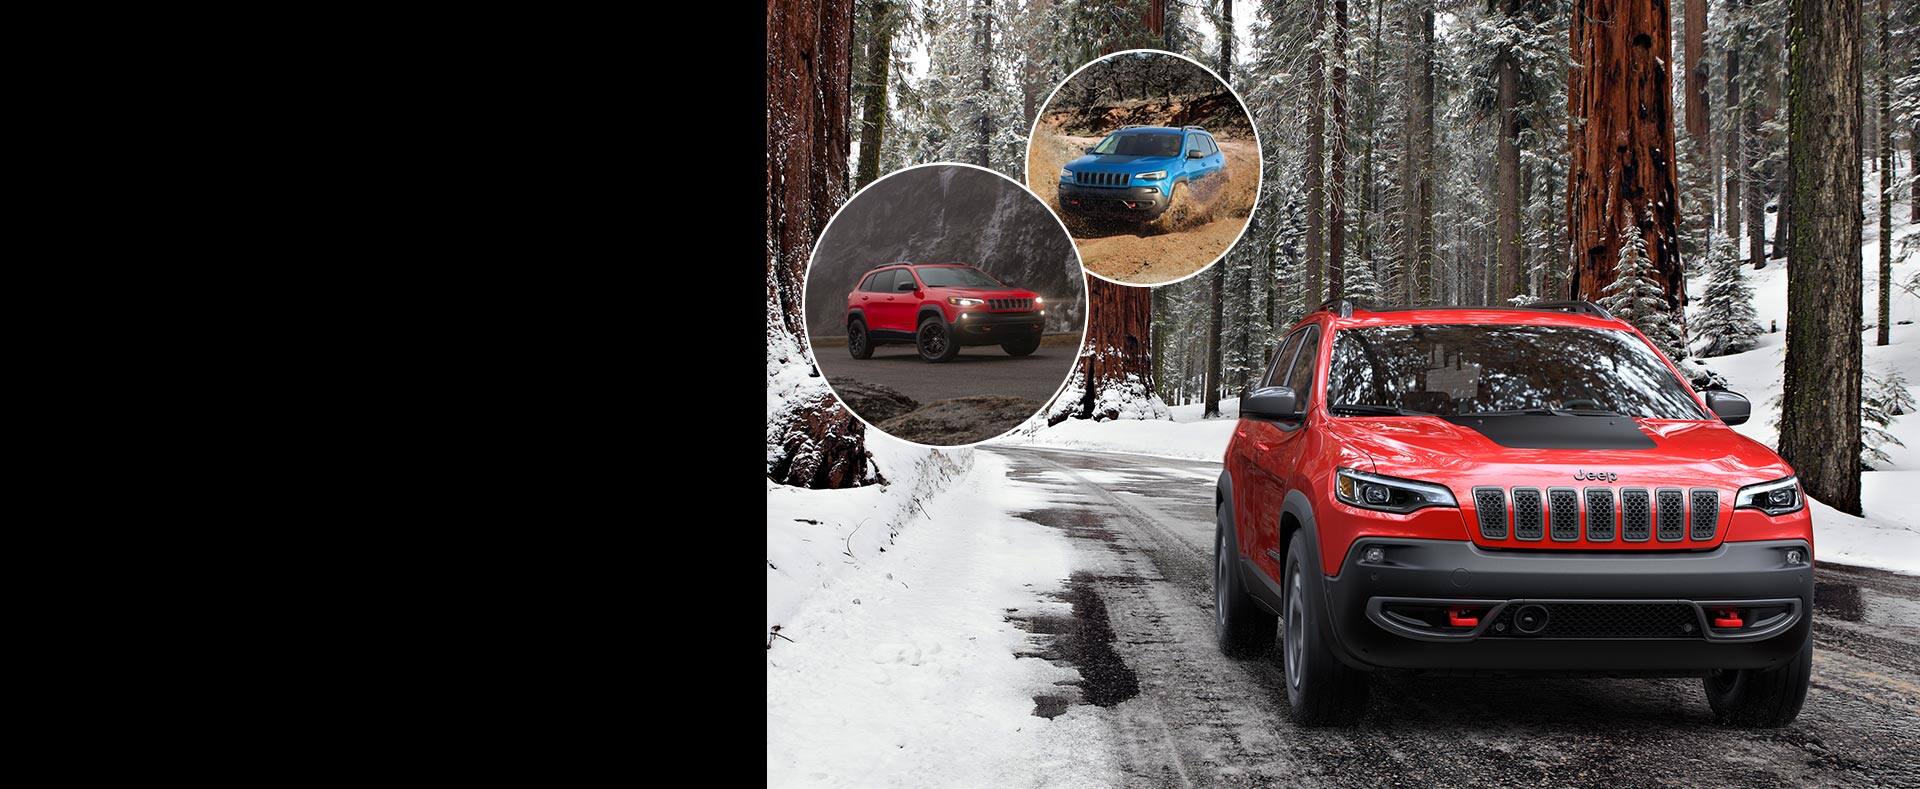 Left image: Jeep Cherokee parked with headlamps on. Center image: Jeep Cherokee being driven in muddy terrain. Right Image: Jeep Cherokee being driven in a snowy forest.